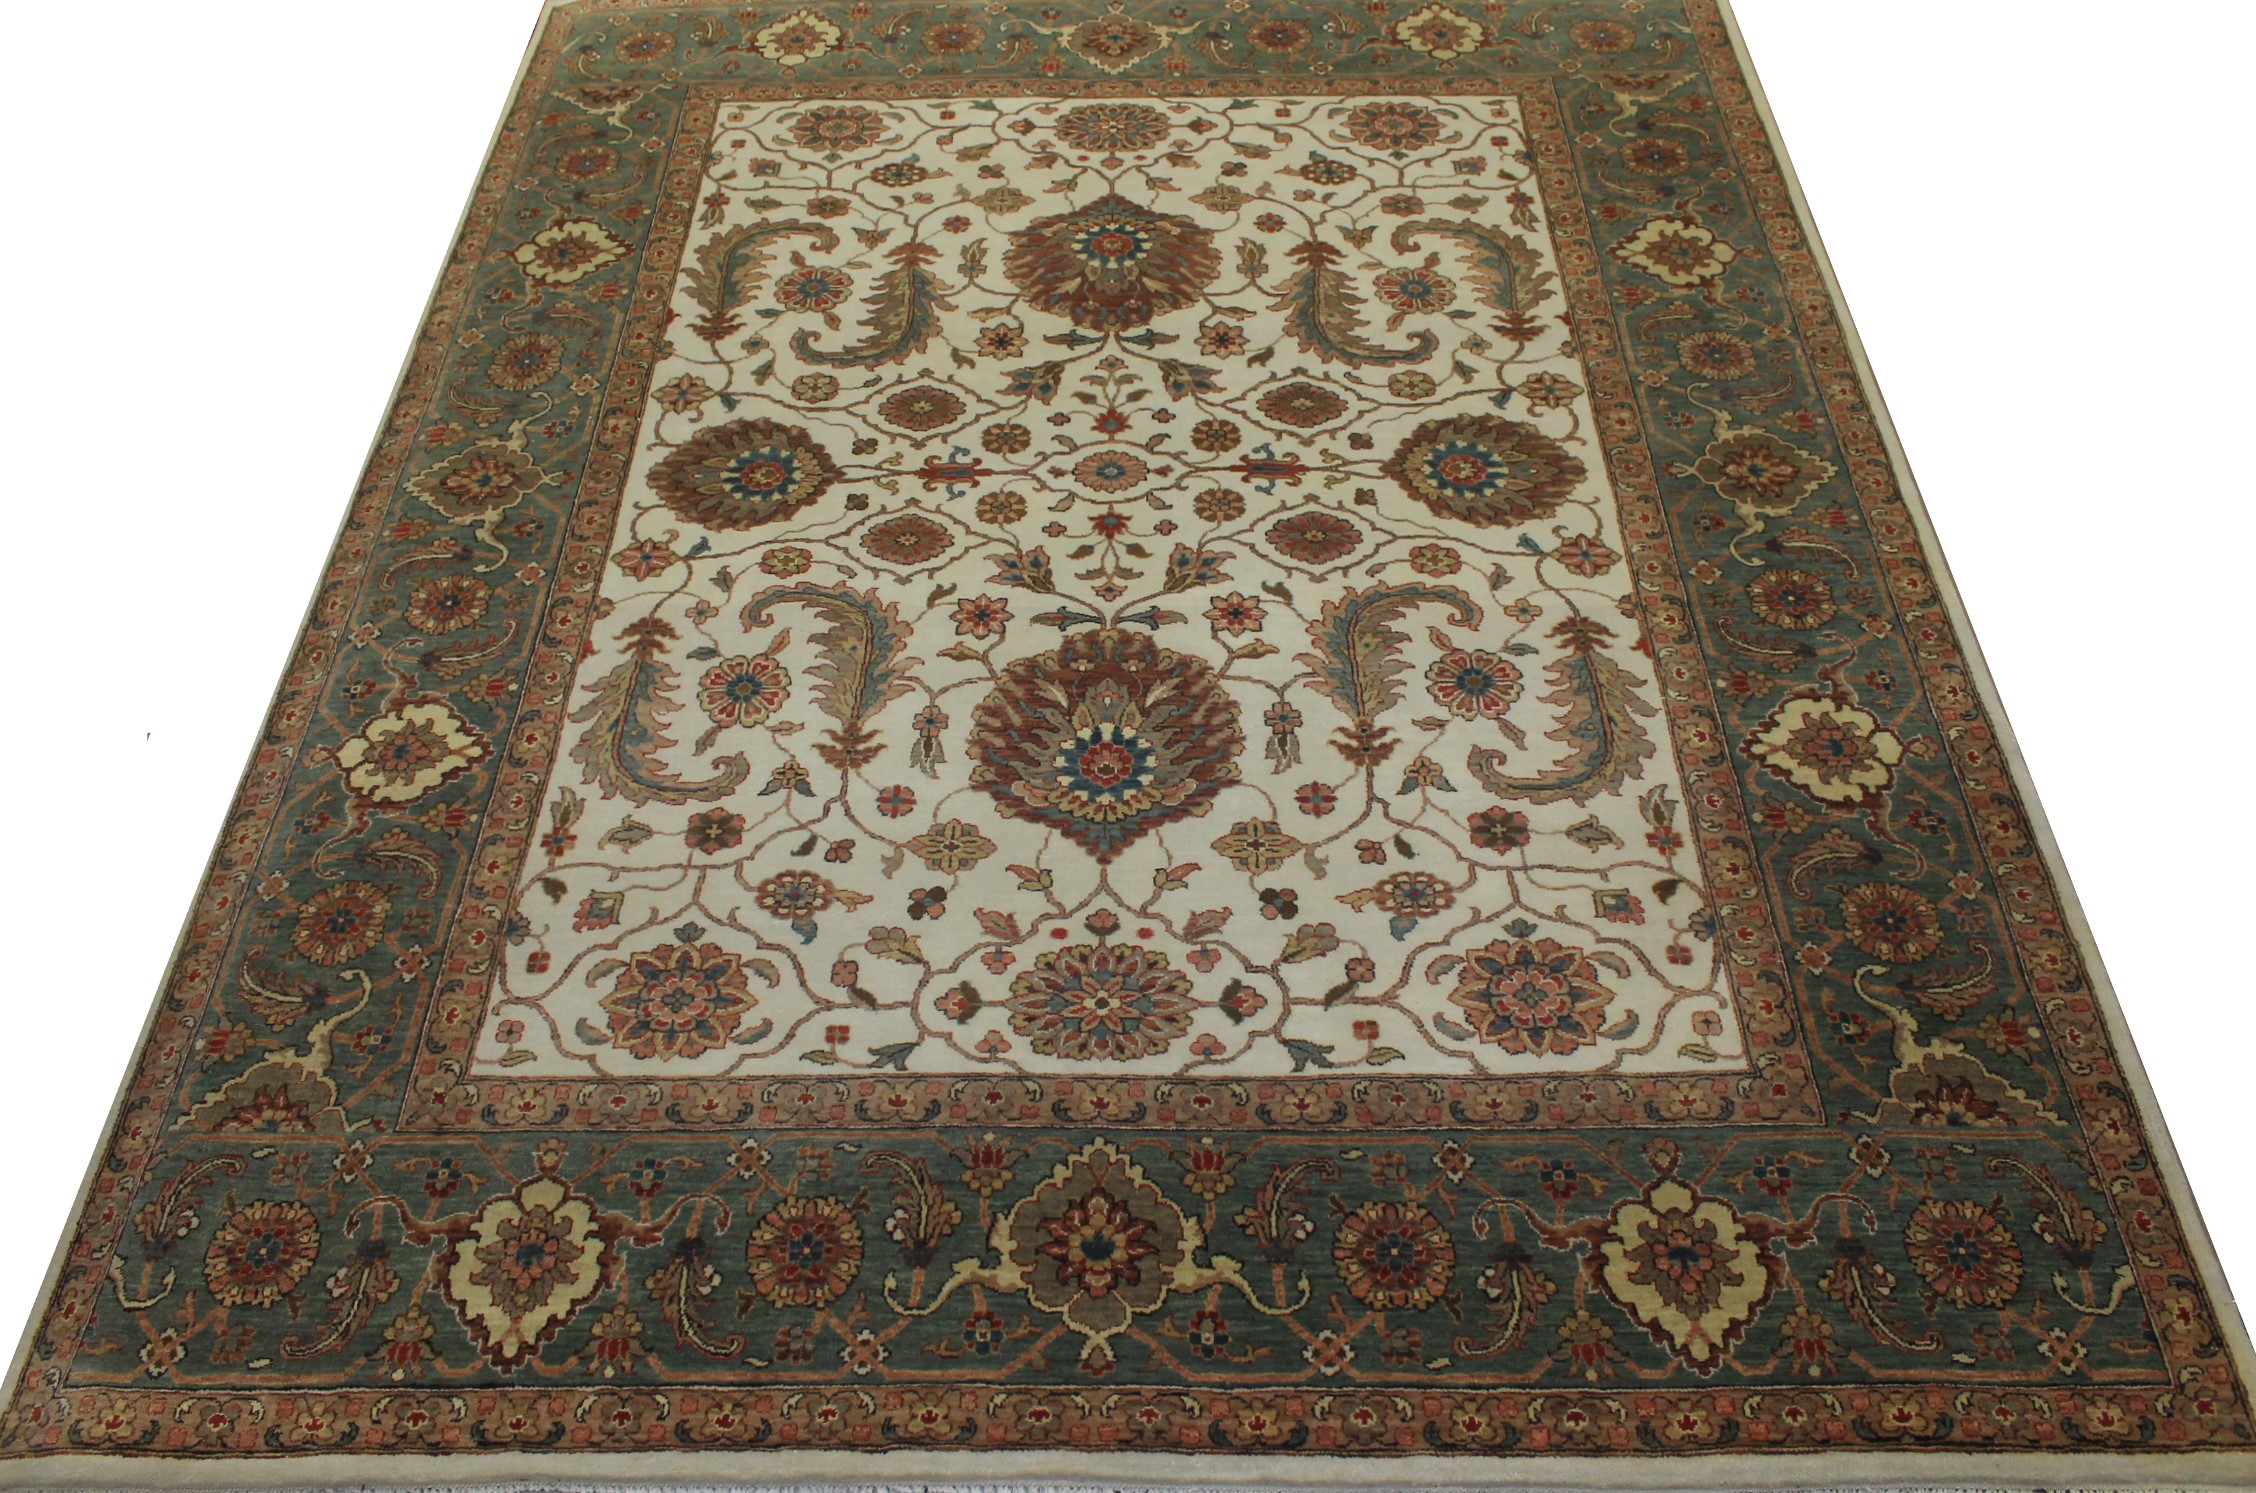 8x10 Antique Revival Hand Knotted Wool Area Rug - MR19910